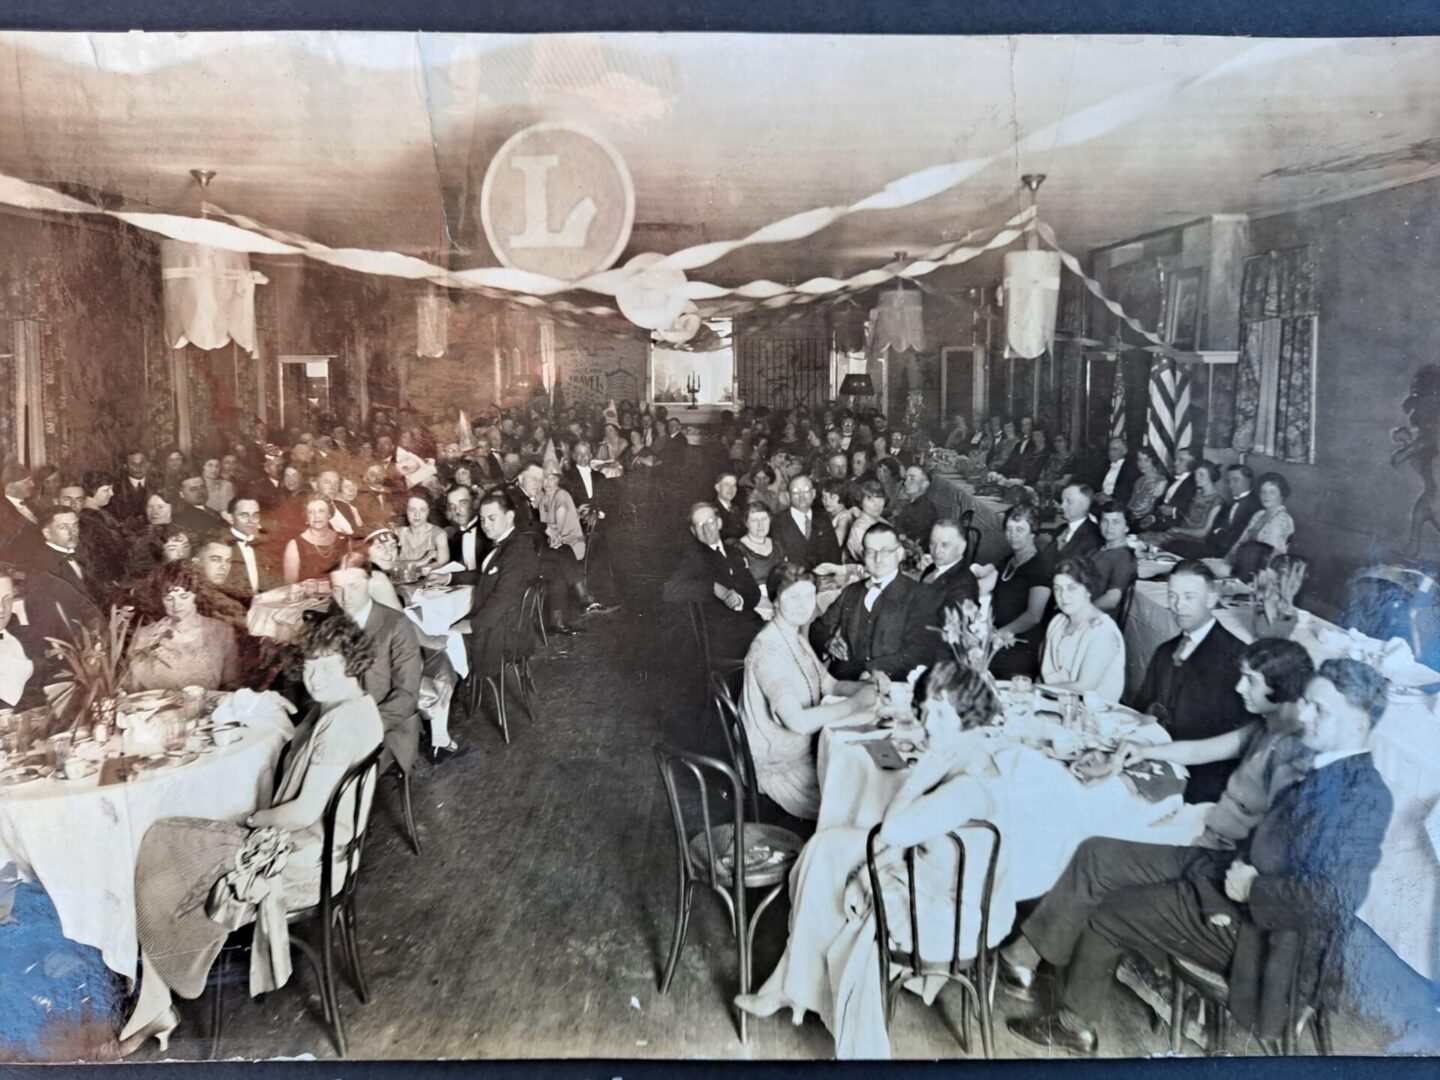 Old photo of people sitting at an event